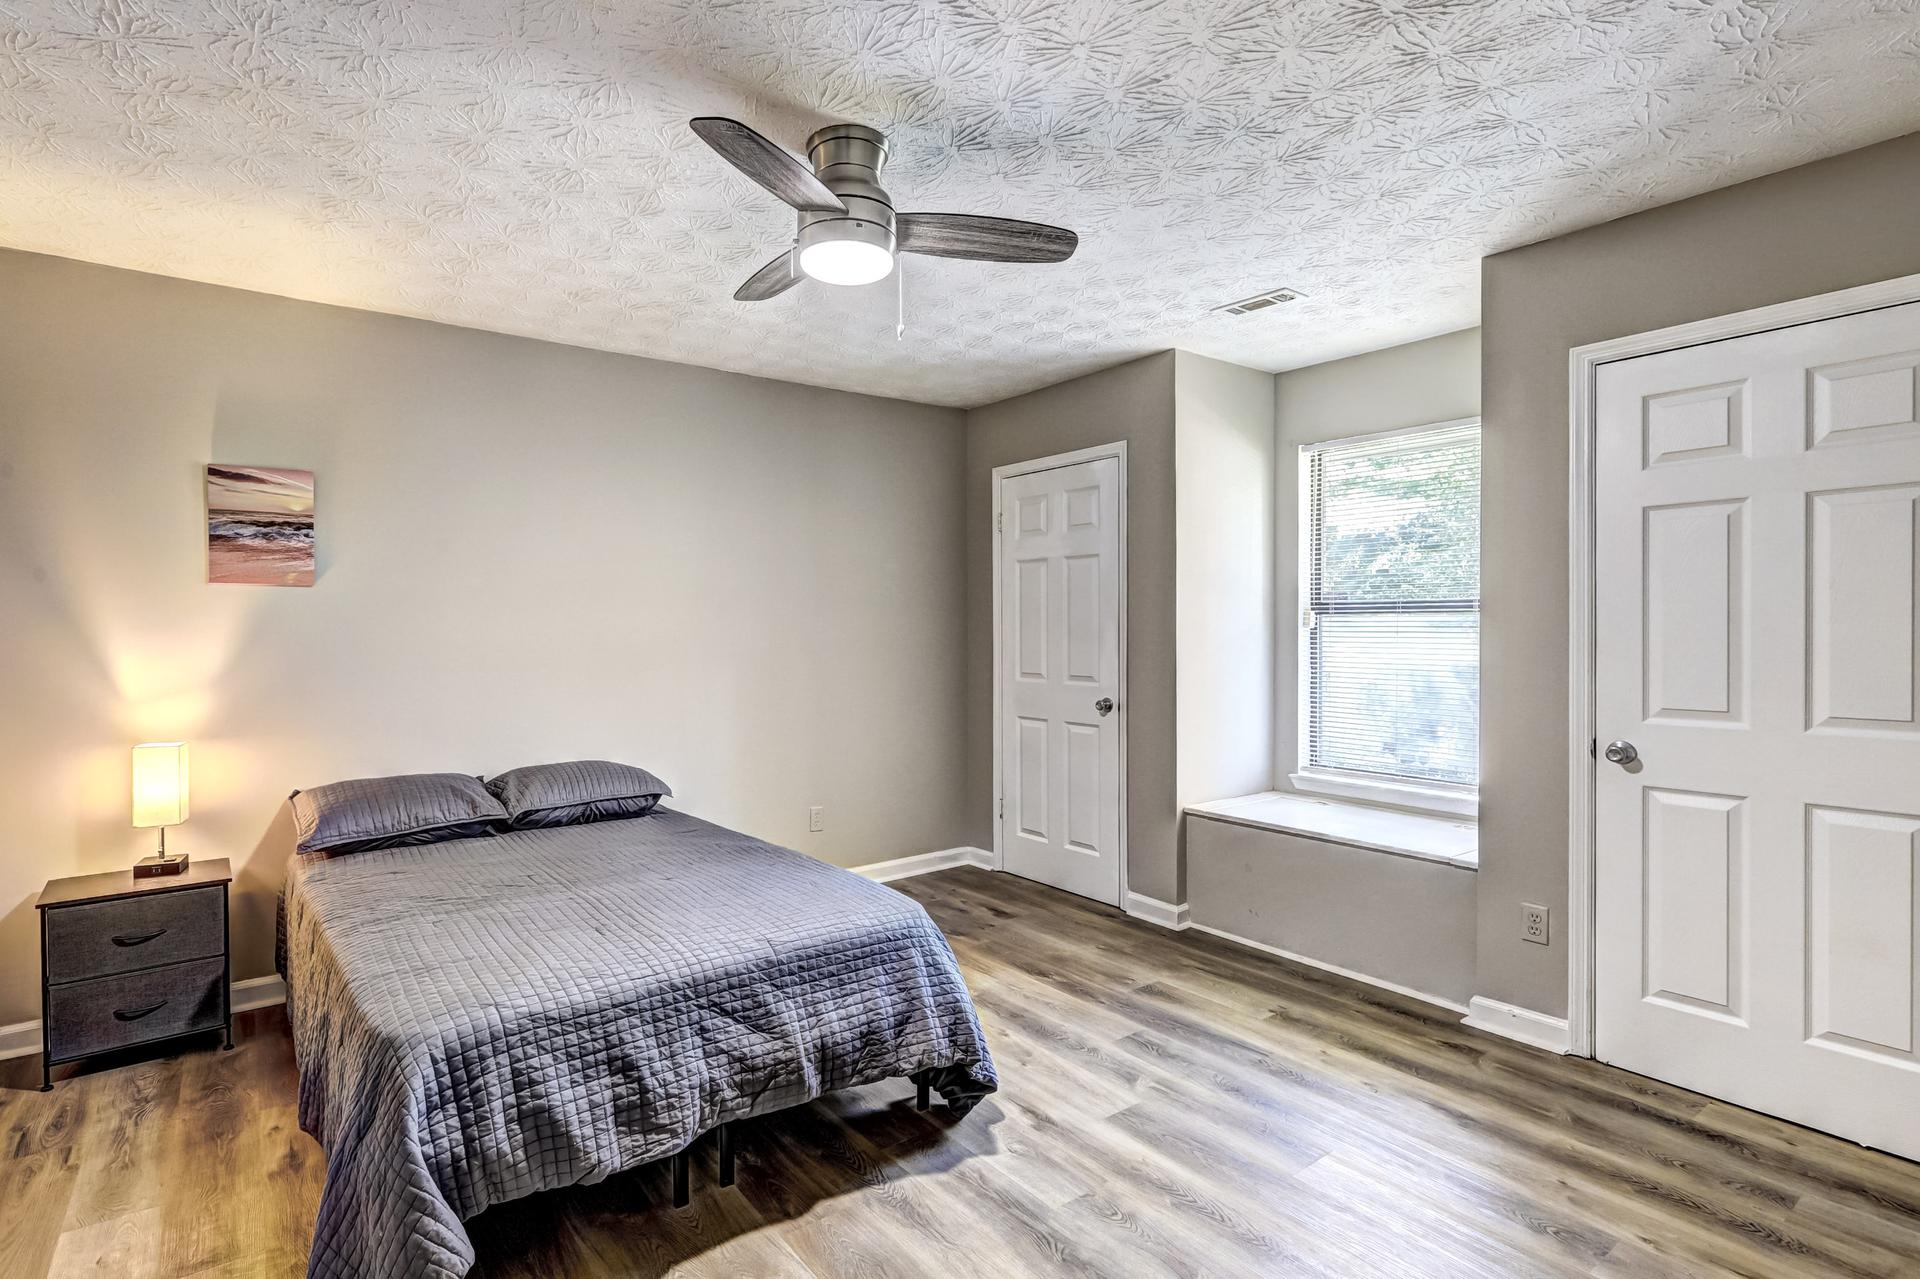 Queen bed, ceiling fan, and sit in window with extra storage